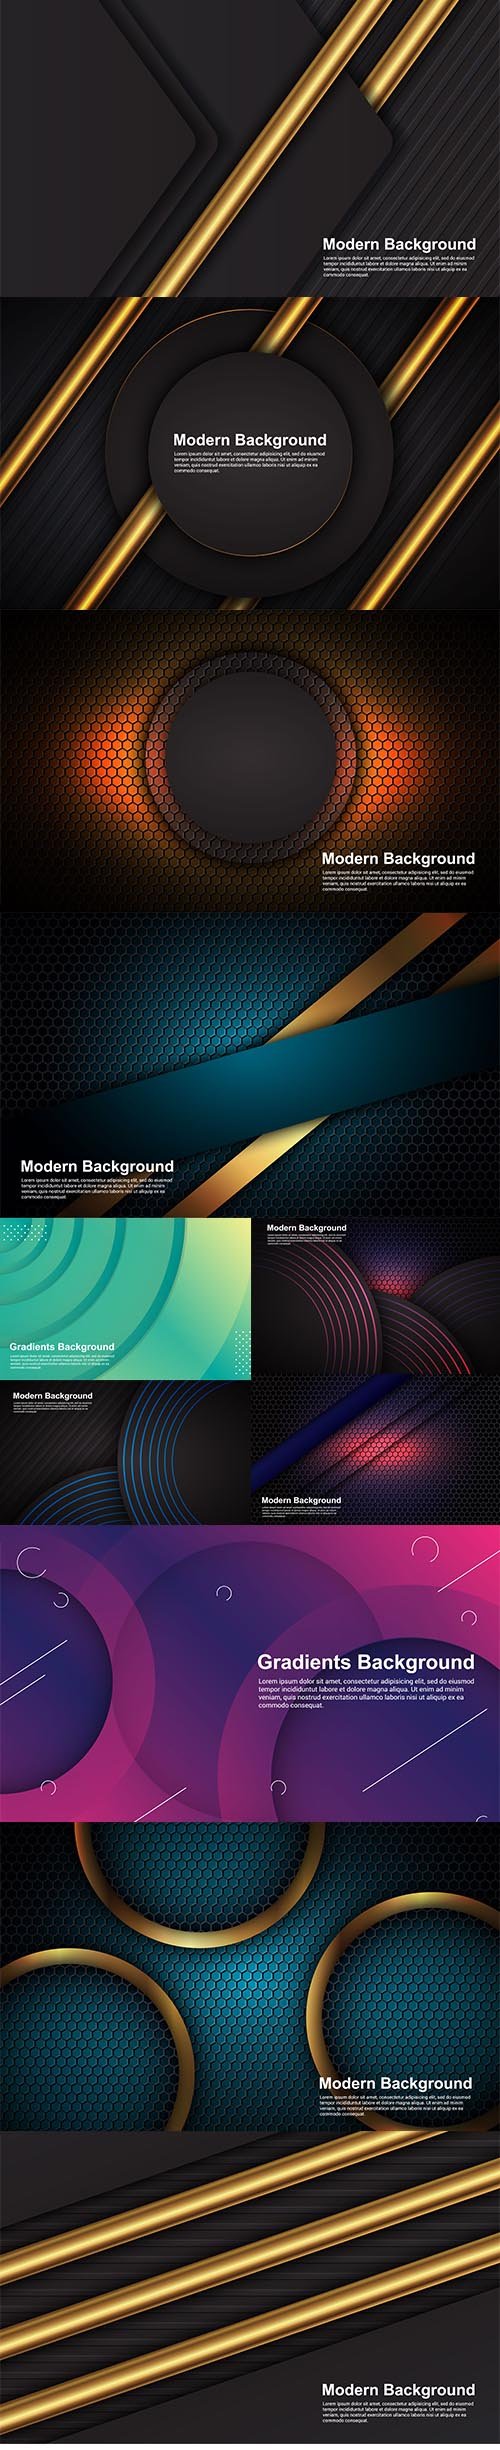 Abstract Stunning Backgrounds Set